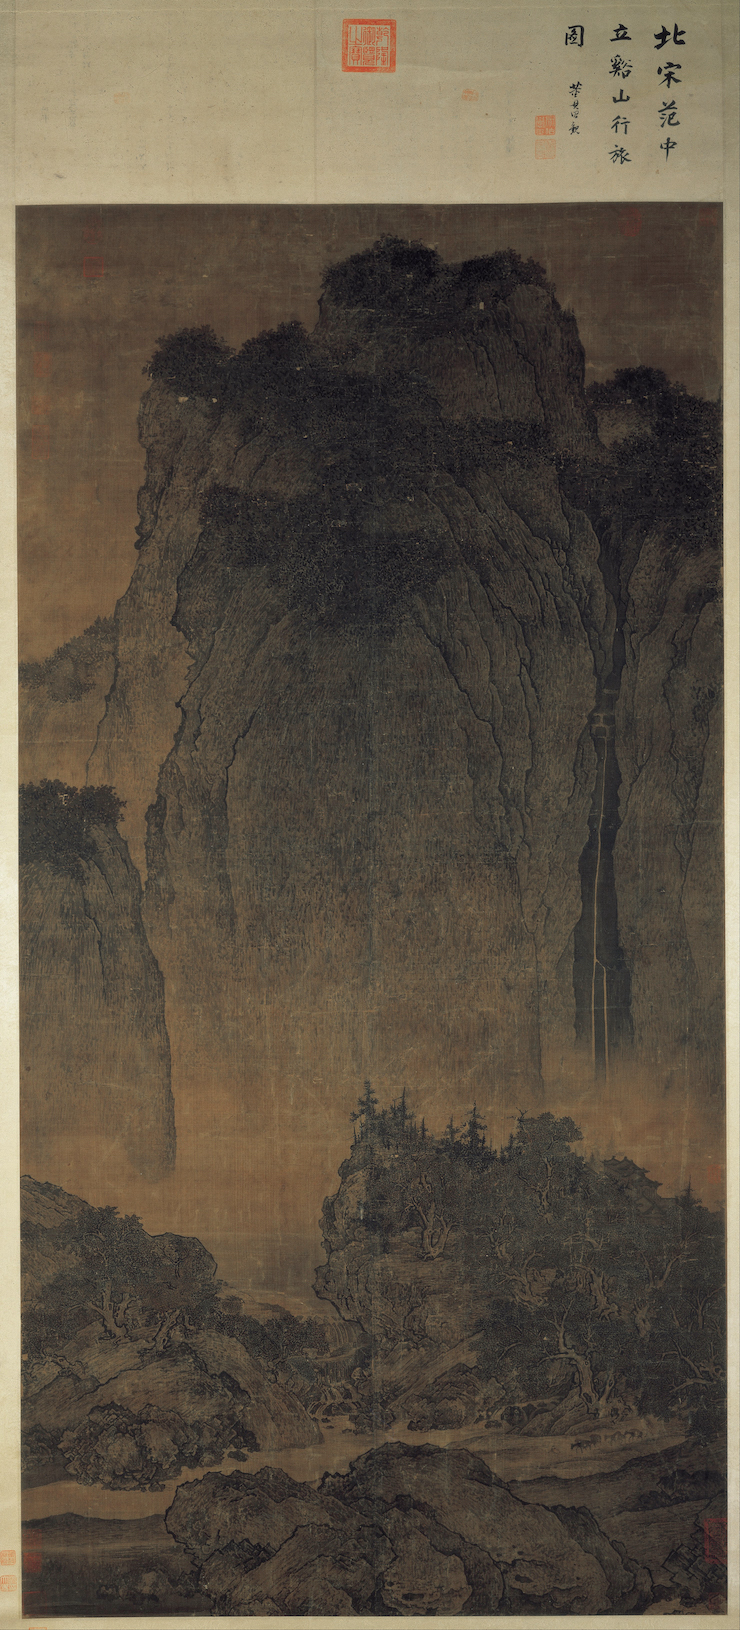 Fan Kuan, Travelers by Streams and Mountains, ink on silk hanging scroll, c. 1000, 206.3 x 103.3 cm. (National Palace Museum, Taipei)